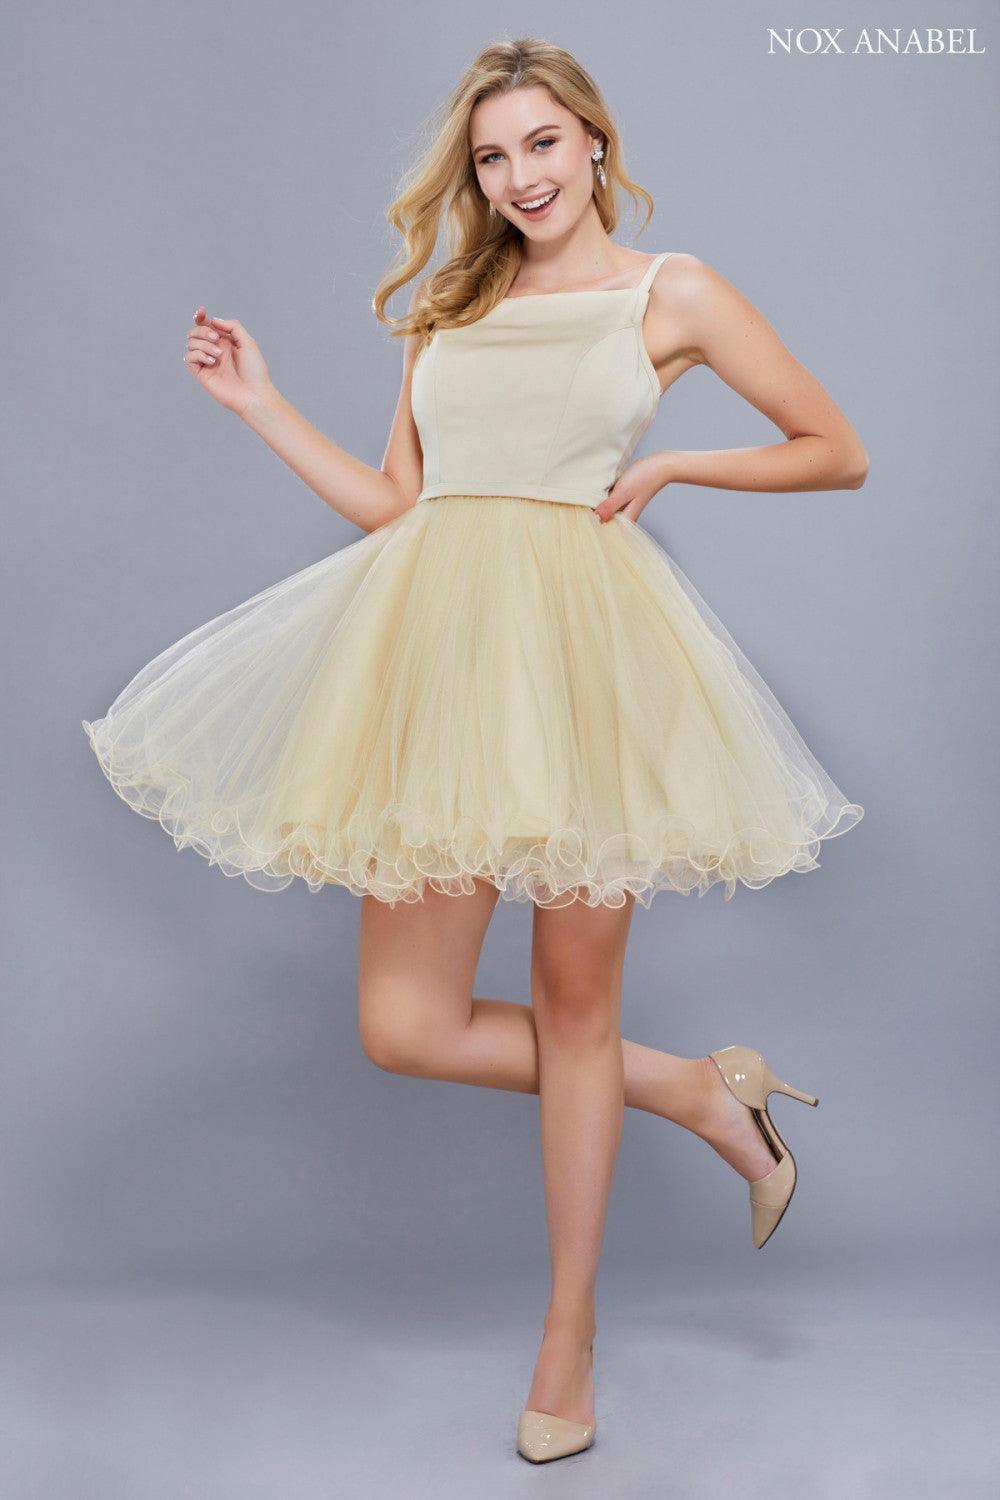 Short Sleeveless Tulle Formal Homecoming Prom Dress - The Dress Outlet Nox Anabel